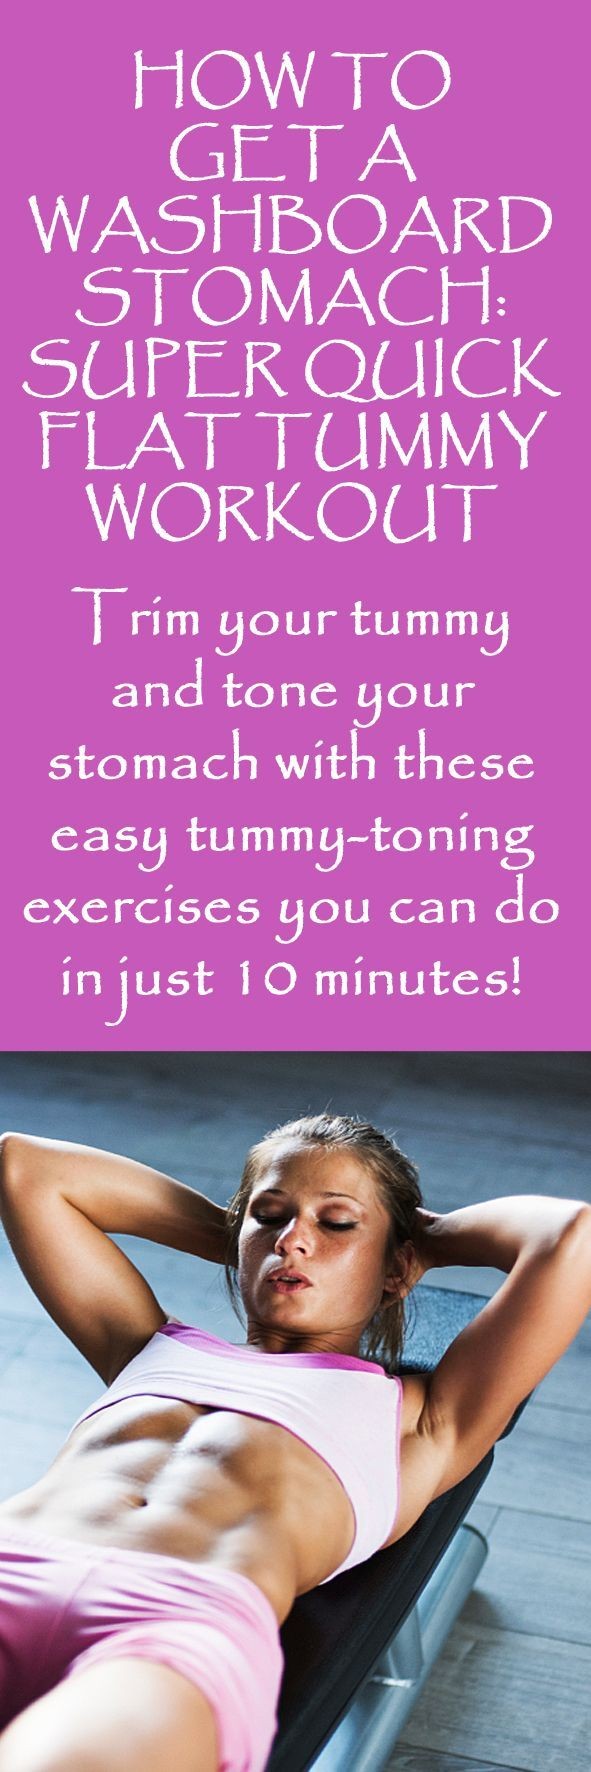 Trim your tummy and tone your stomach with these e...